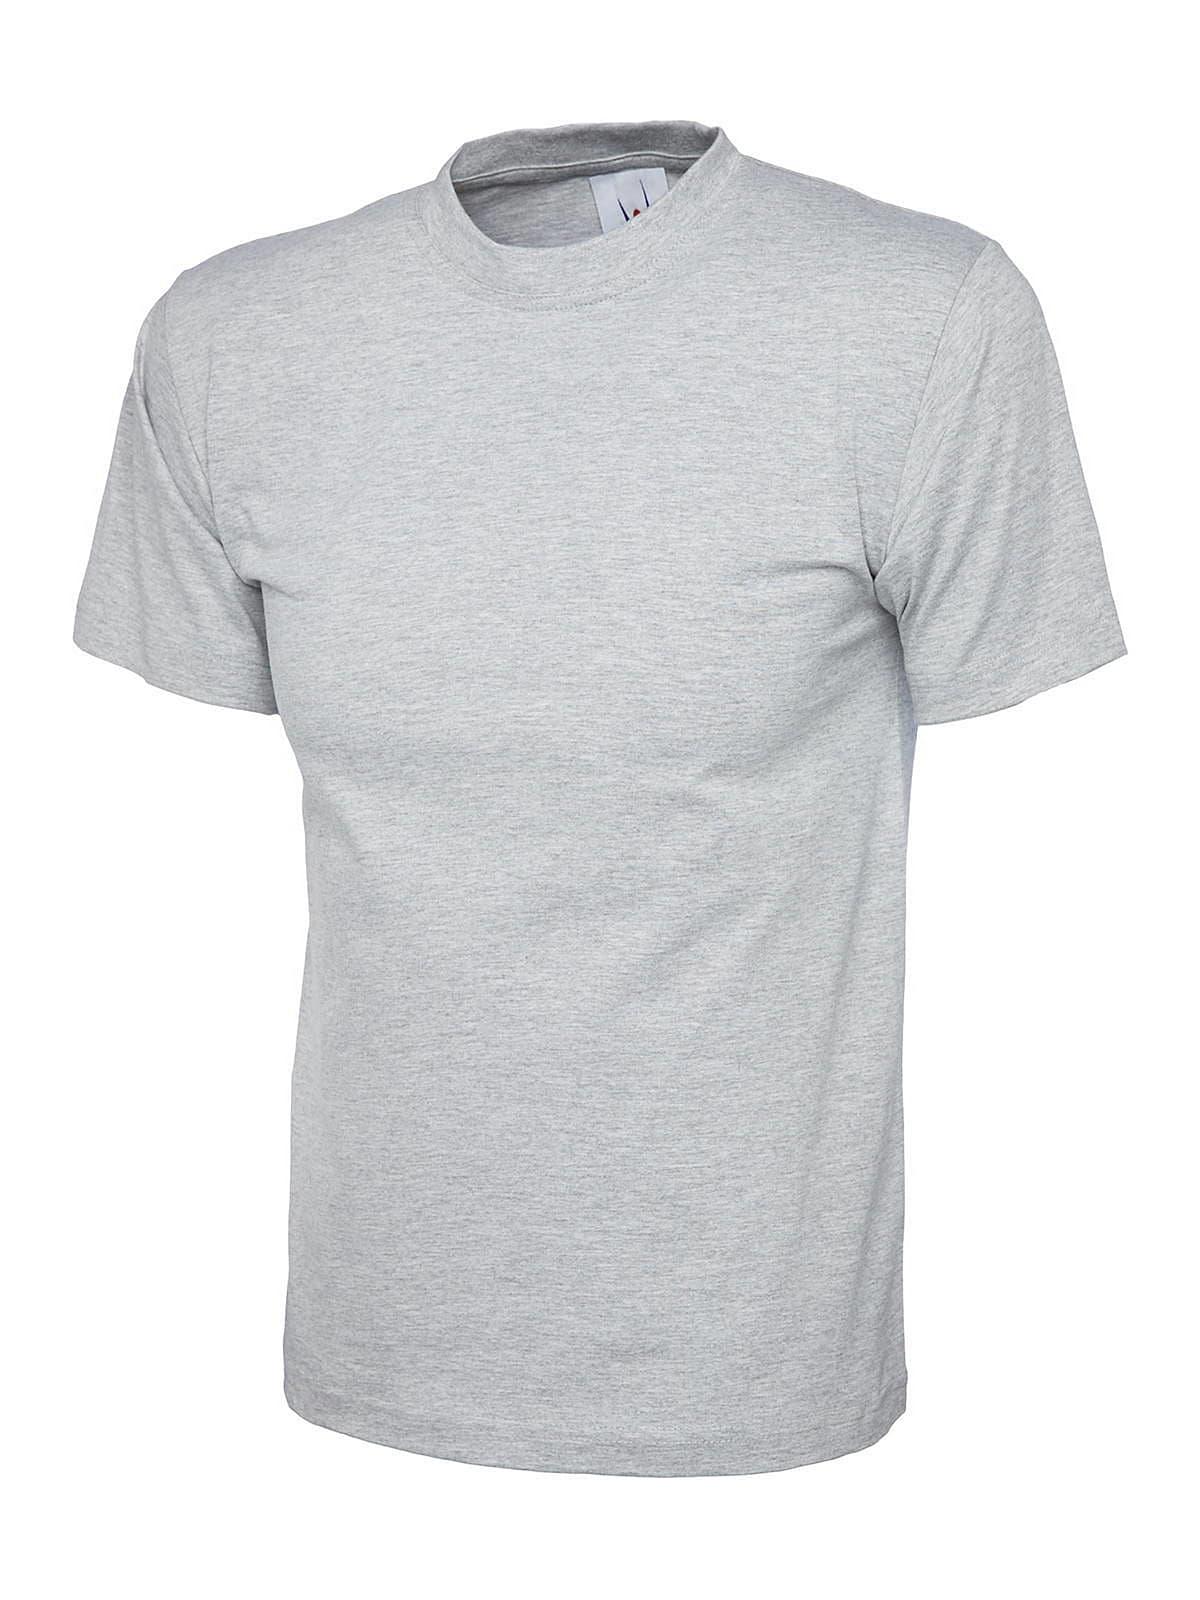 Uneek Childrens 180GSM T-Shirt in Heather Grey (Product Code: UC306)